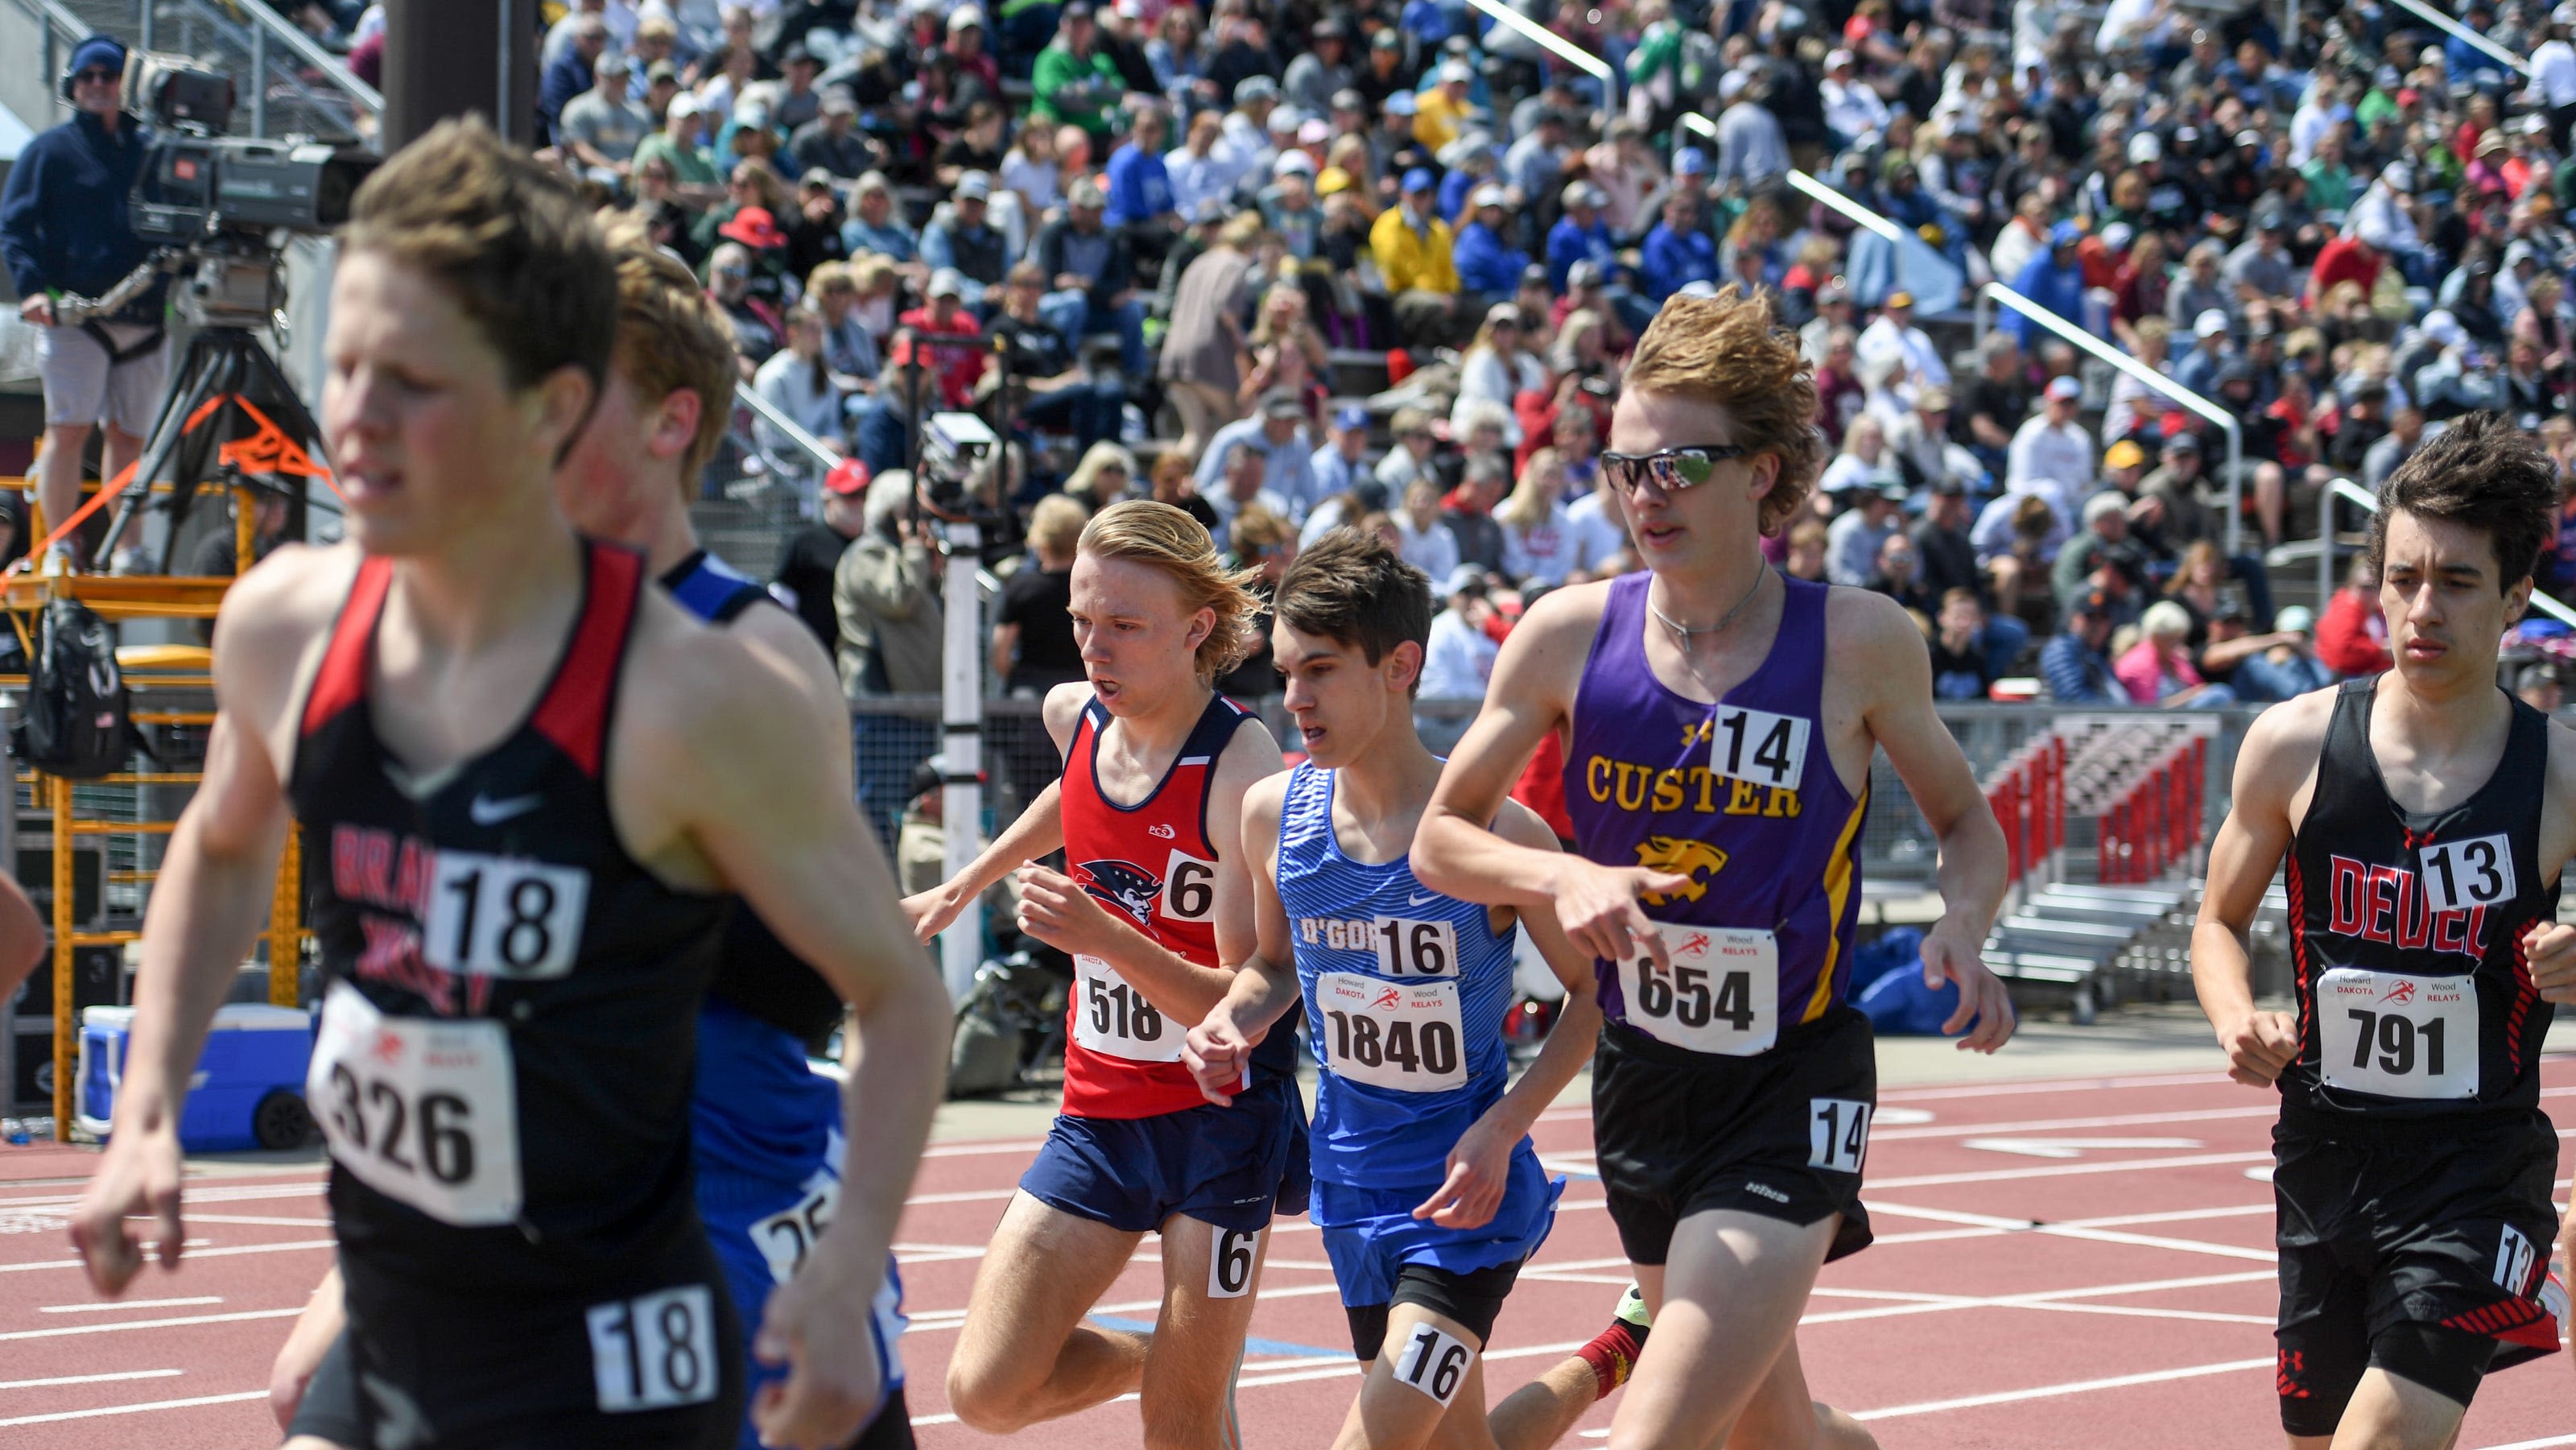 Howard Wood Dakota Relays special event participants announced: Here's who's been selected